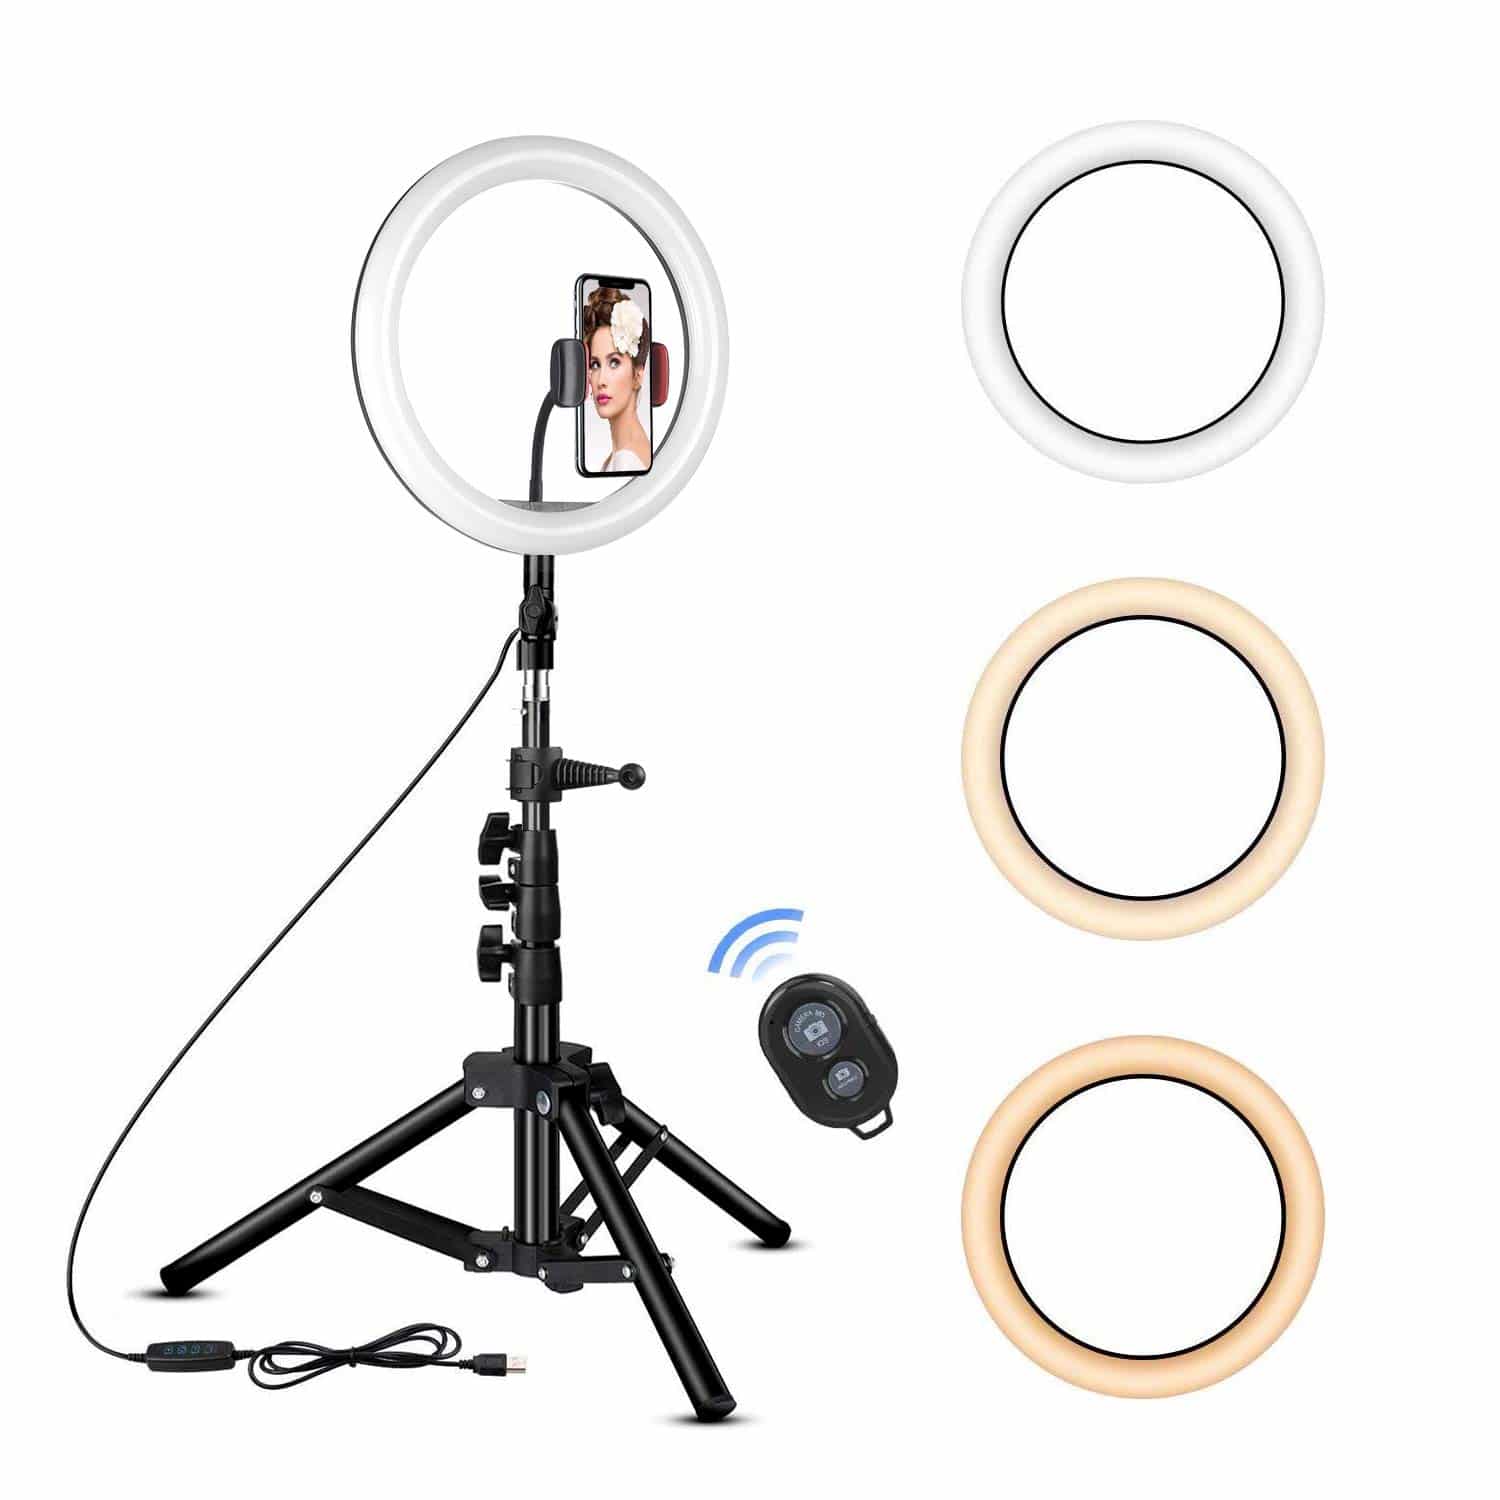 Rovtop 10 inch Ring Light with Stand Tripod